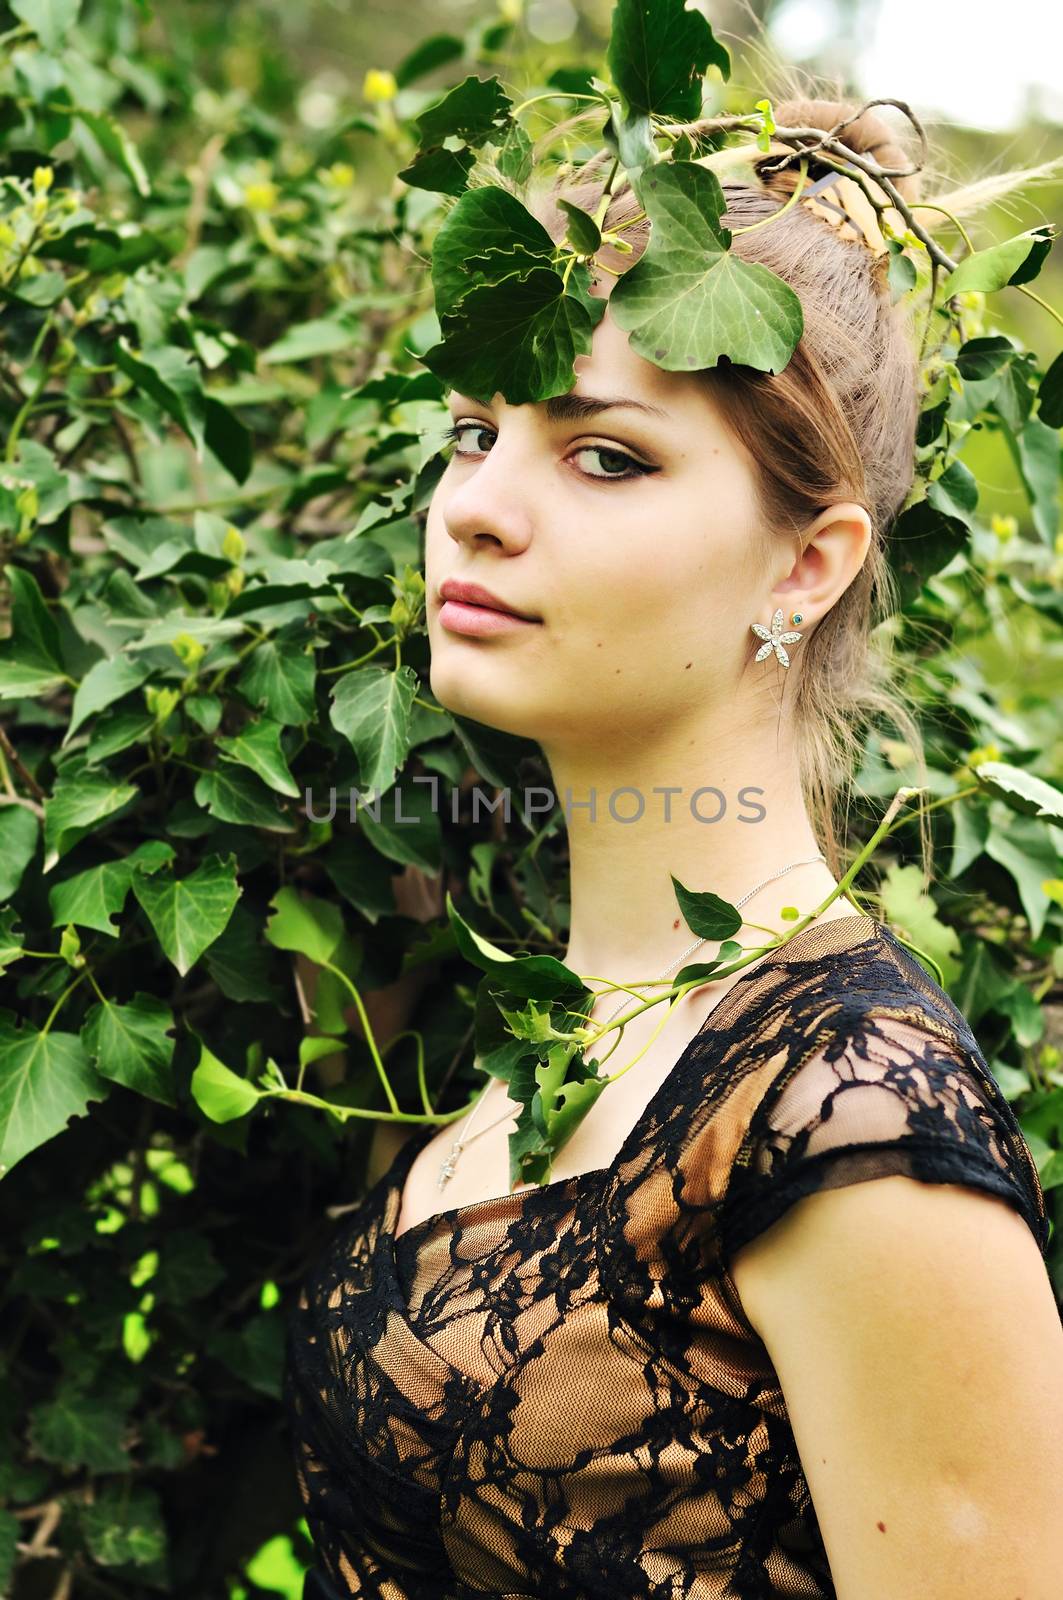 forest awesome  nymph - beautiful girl in the green leaves 